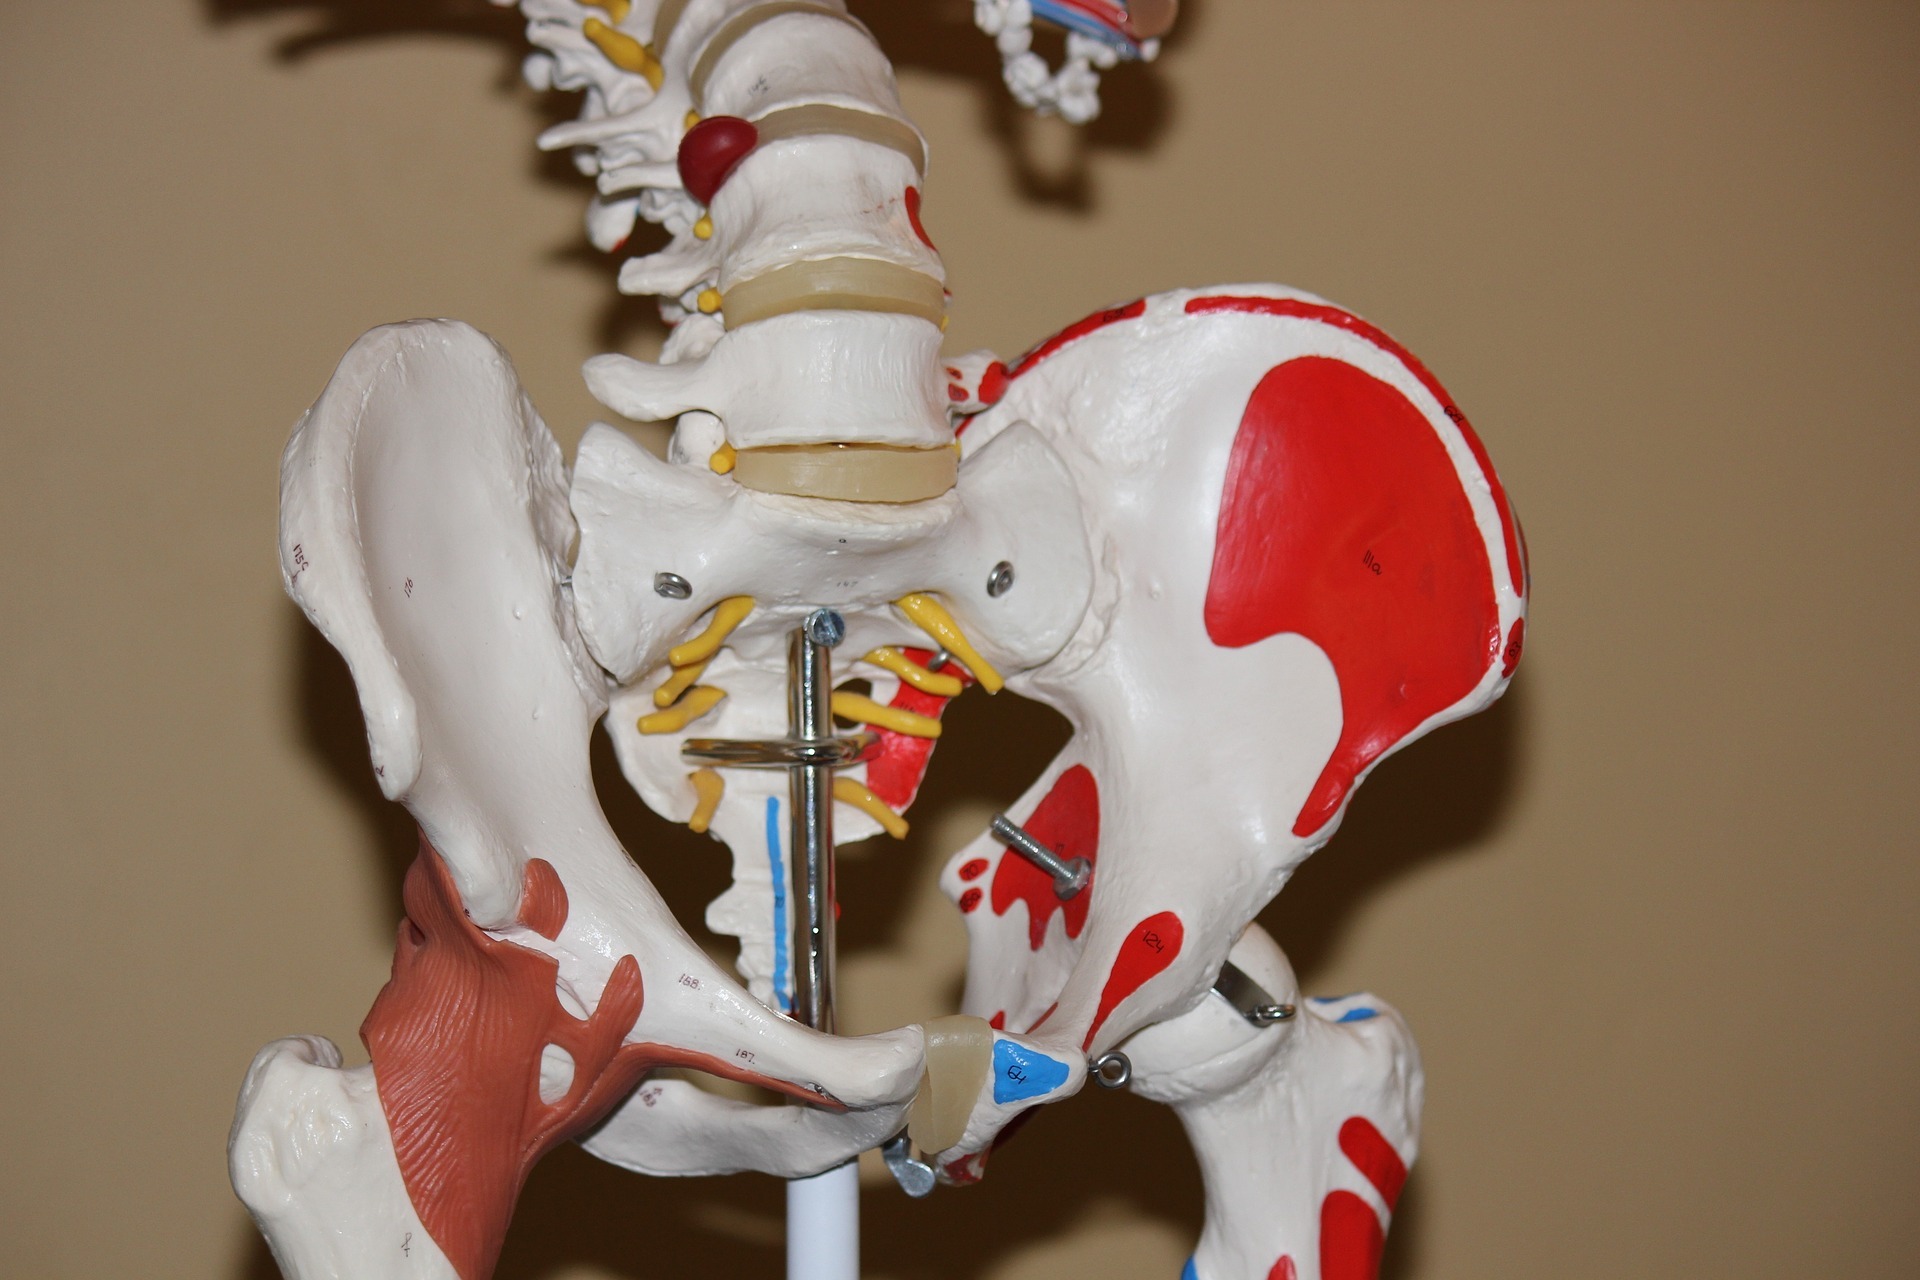 Hip Pain – It hurts to move my hip